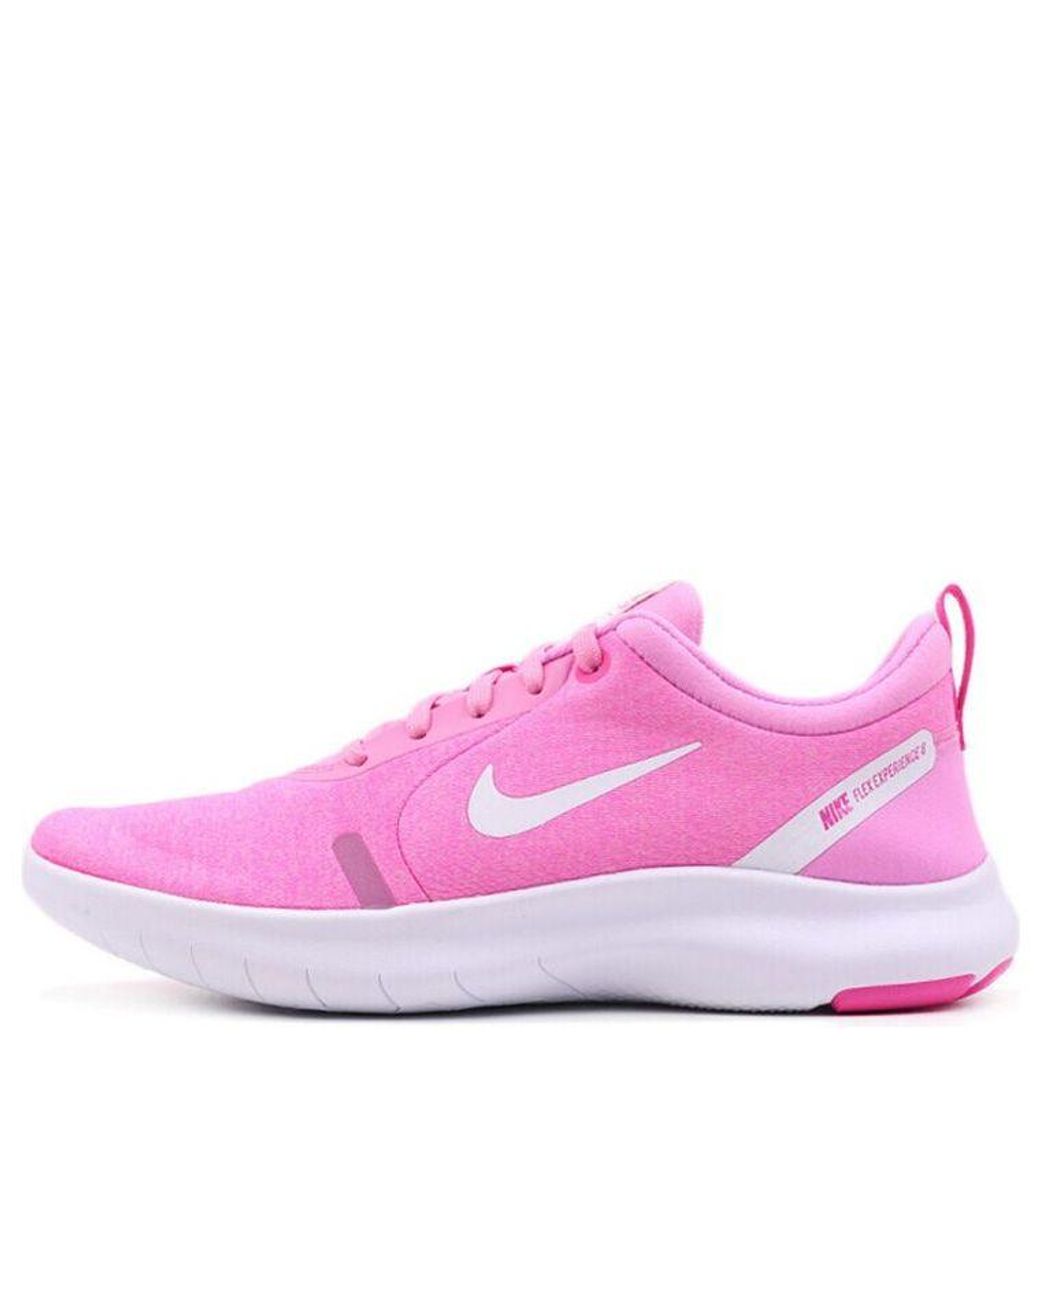 Nike Flex Experience Rn 'psychic Pink'